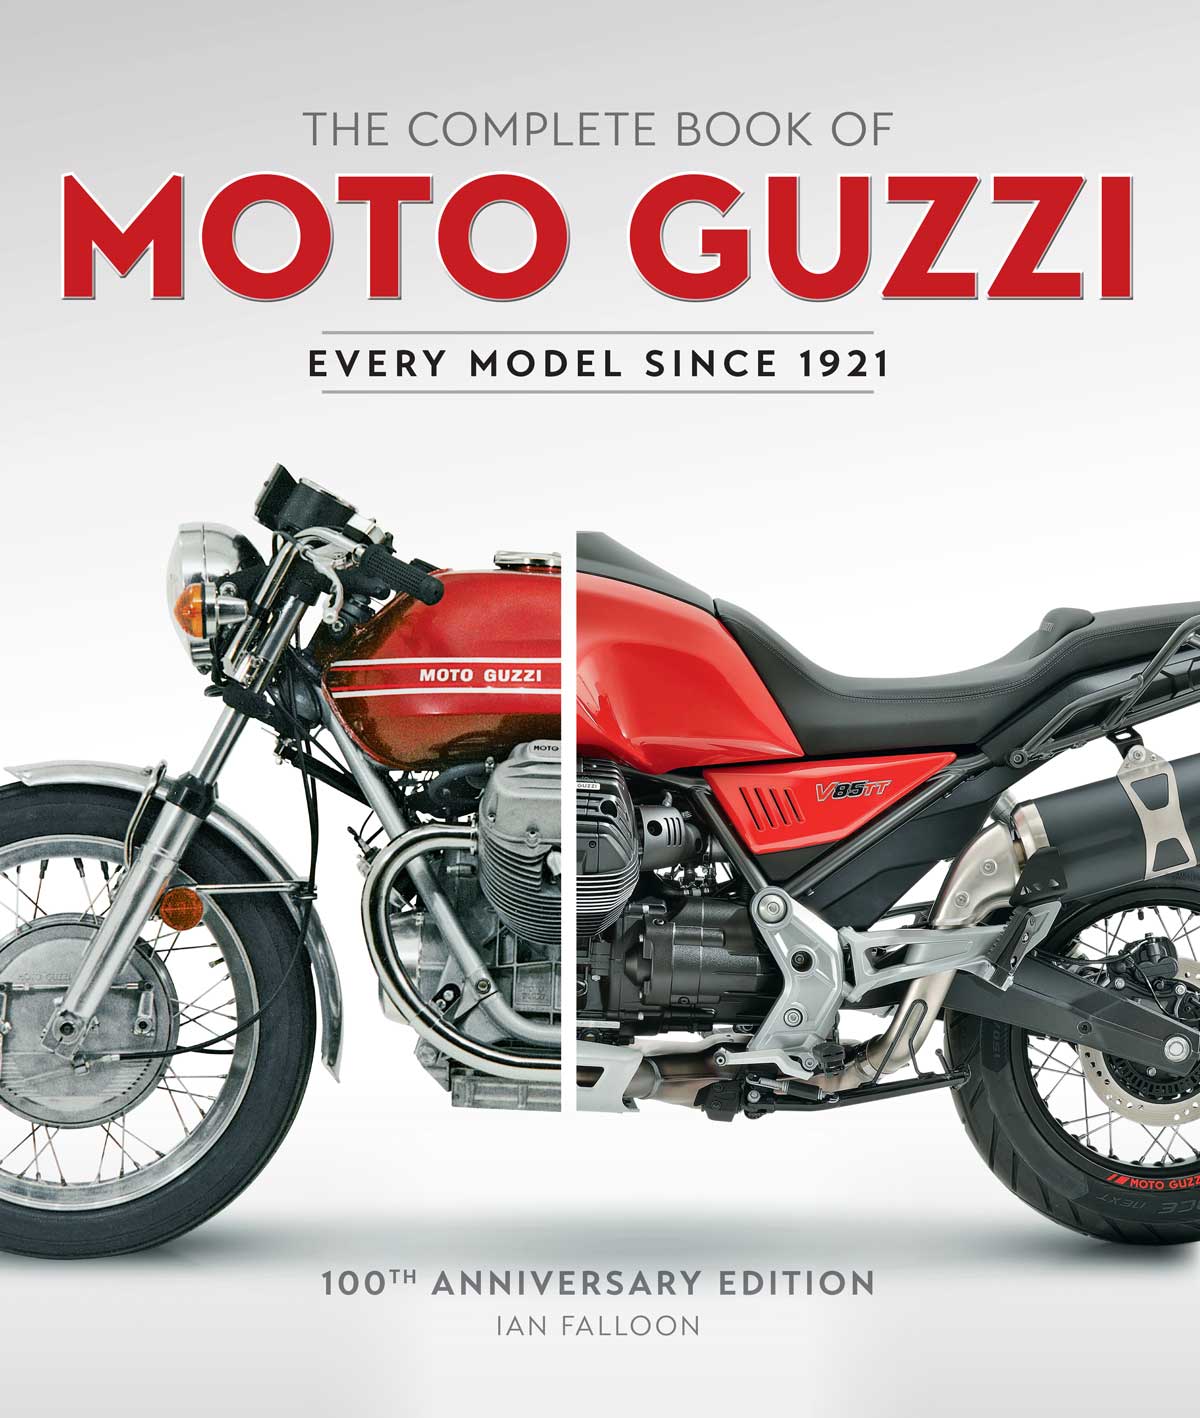 A century of Moto Guzzi – the ultimate guide of all its models